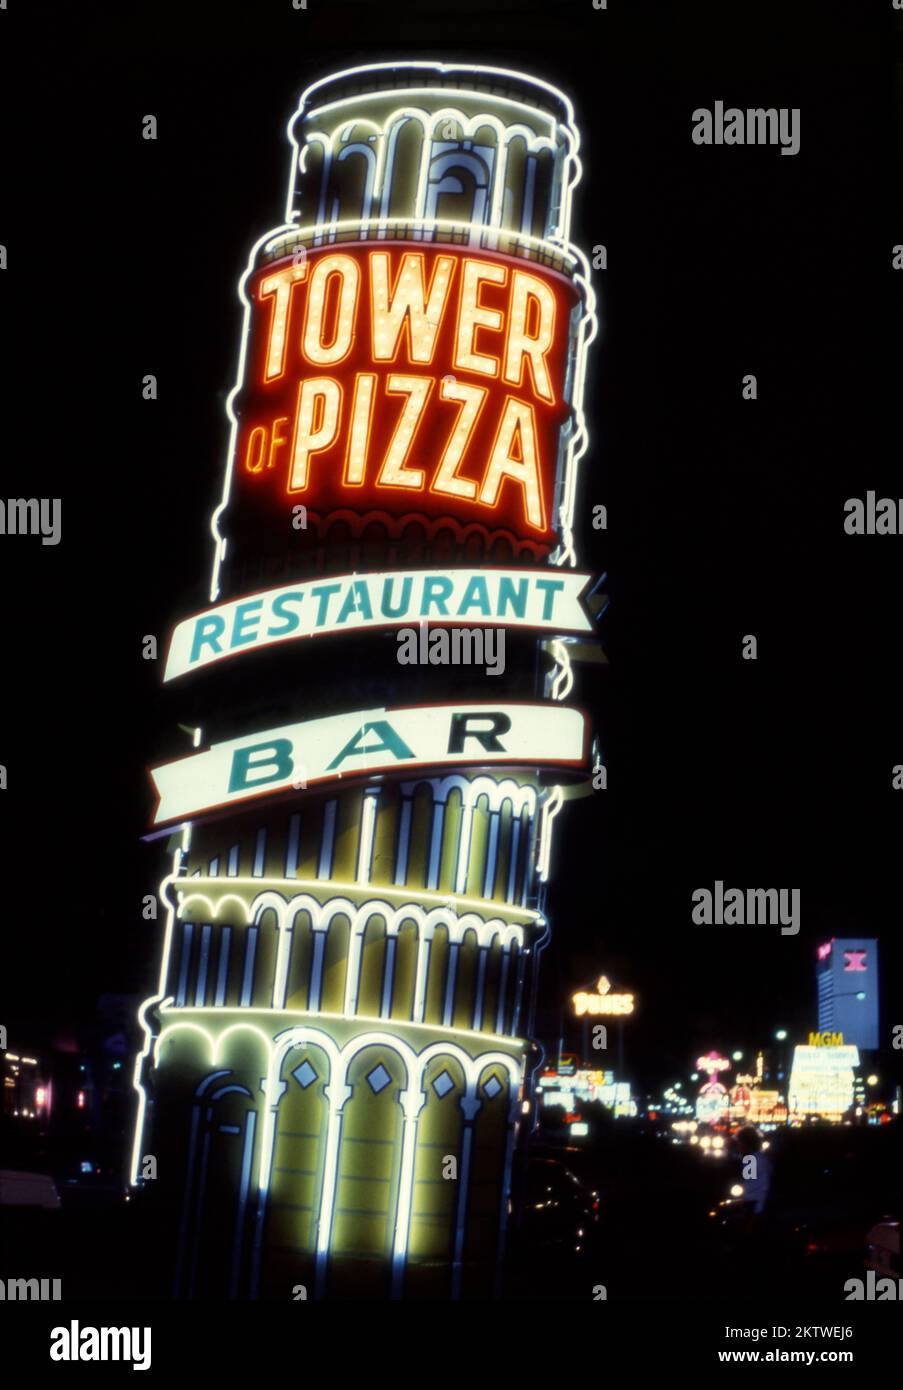 Neon sign for Tower of Pizza restaurant in Las Vegas, Nevada, circa 1970s. Stock Photo